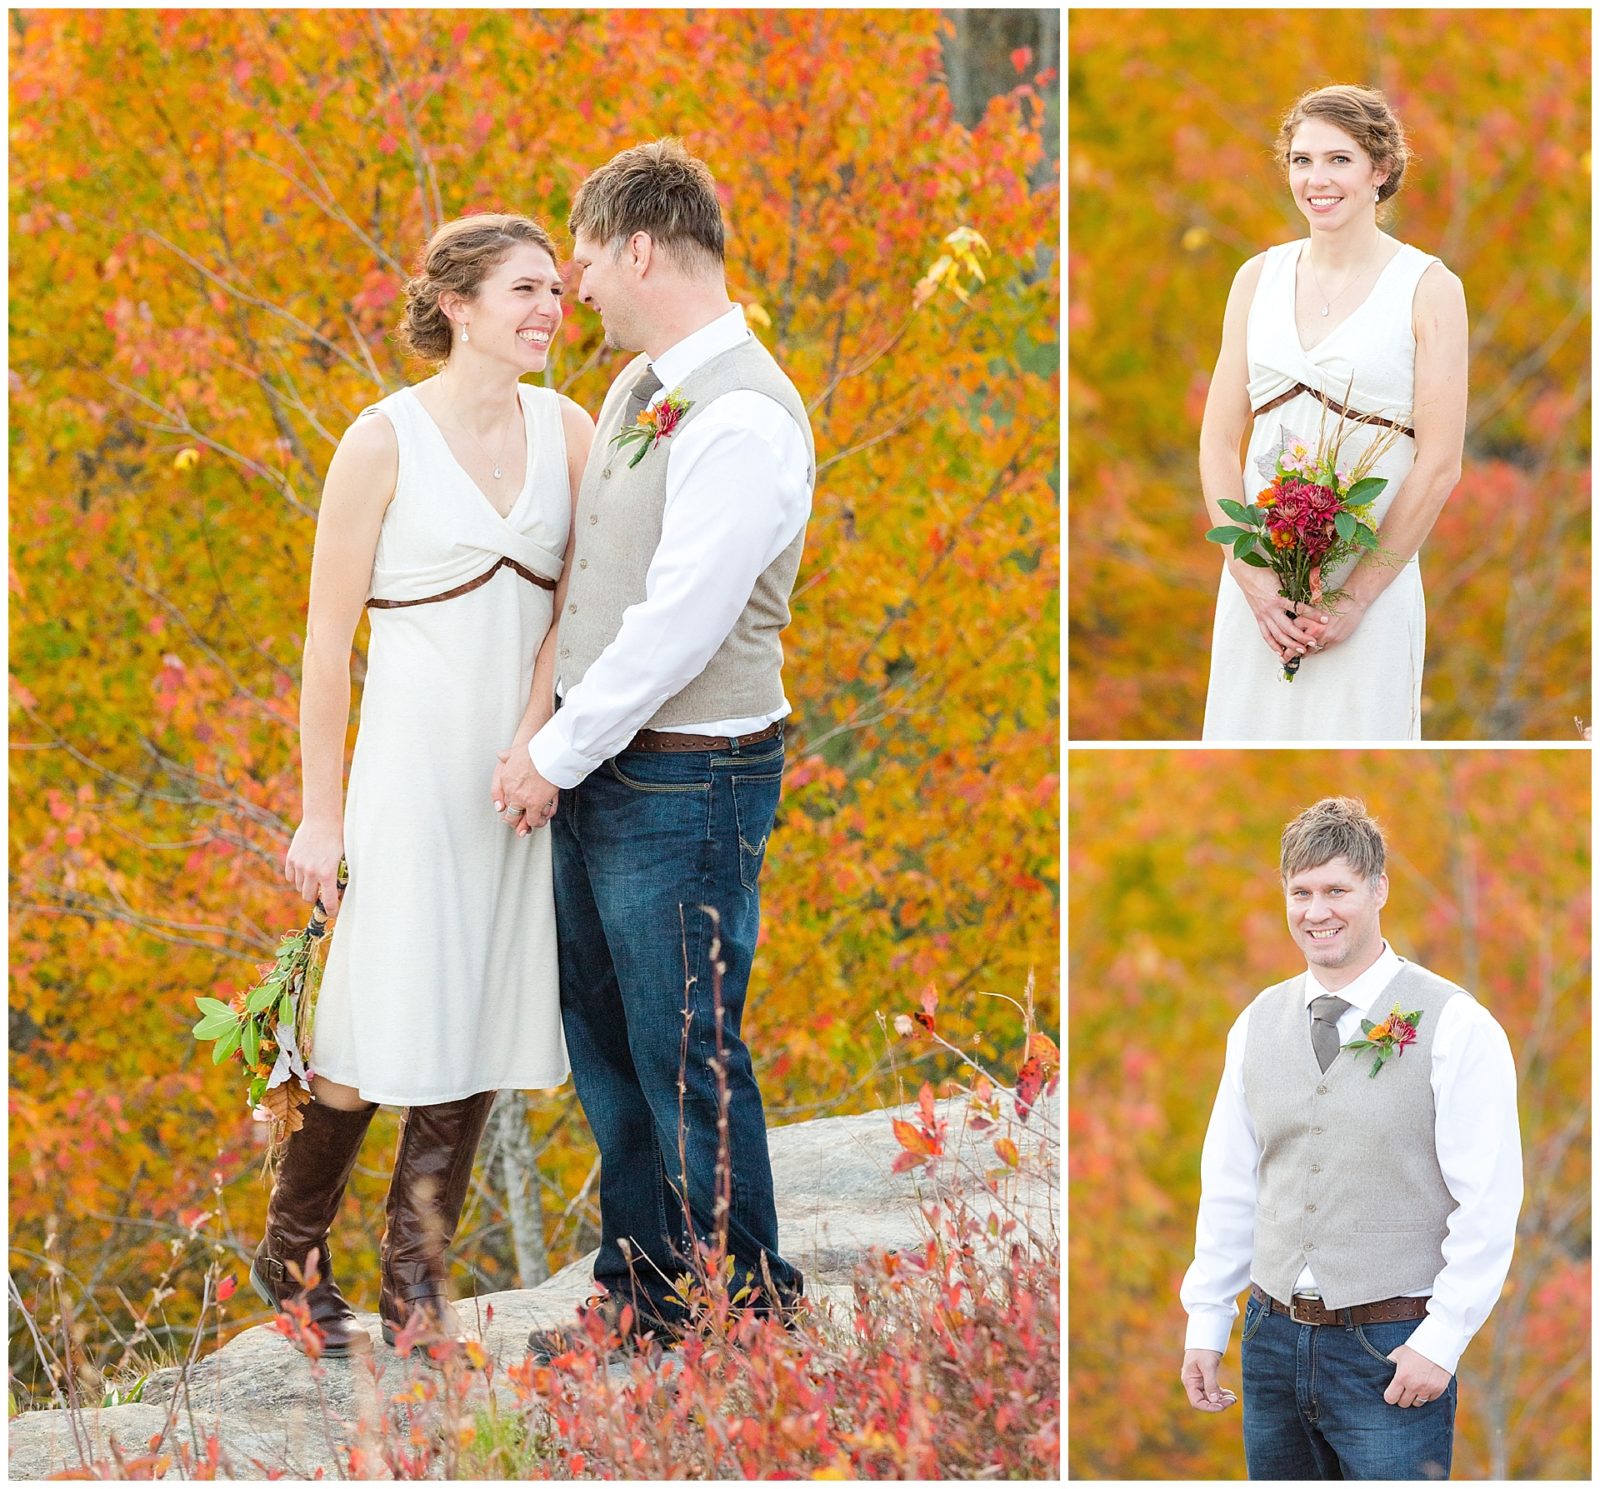 Fall wedding in the Red River Gorge at the Cliffview Resort in Campton, Kentucky. The fall colors during their outdoor ceremony were absolutely spectacular. Photo by: Kevin and Anna Photography www.kevinandannaweddings.com